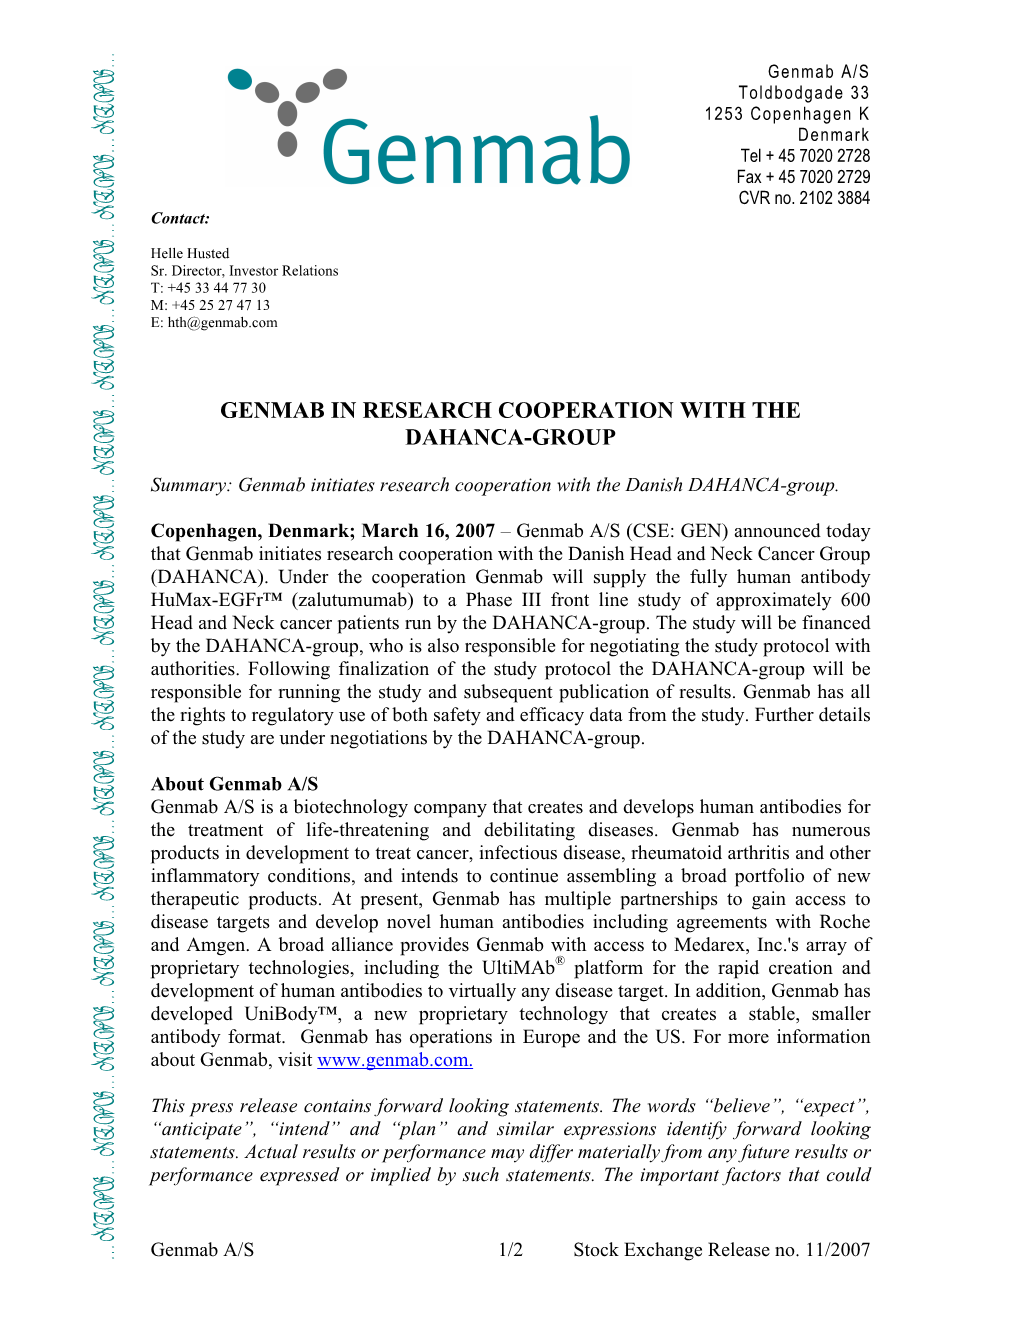 Genmab in Research Cooperation with the Dahanca-Group